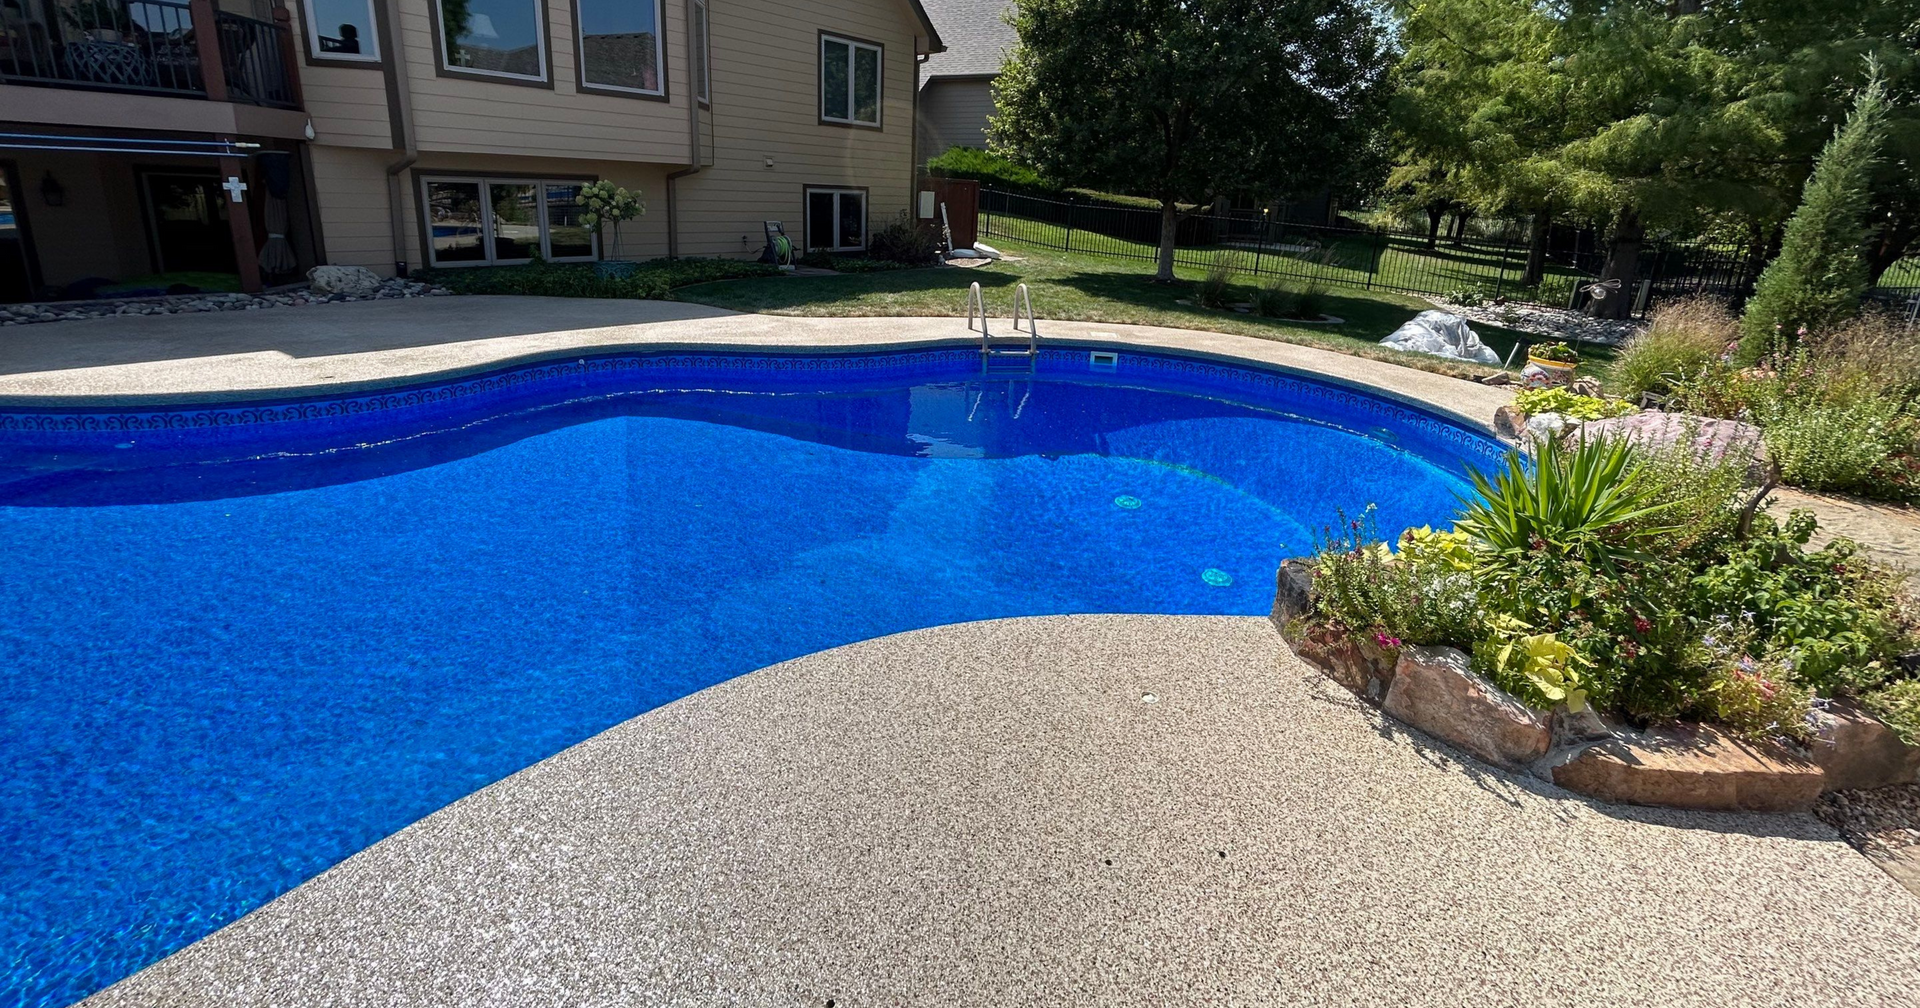 How to Pick the Perfect Coating for Poolside Safety